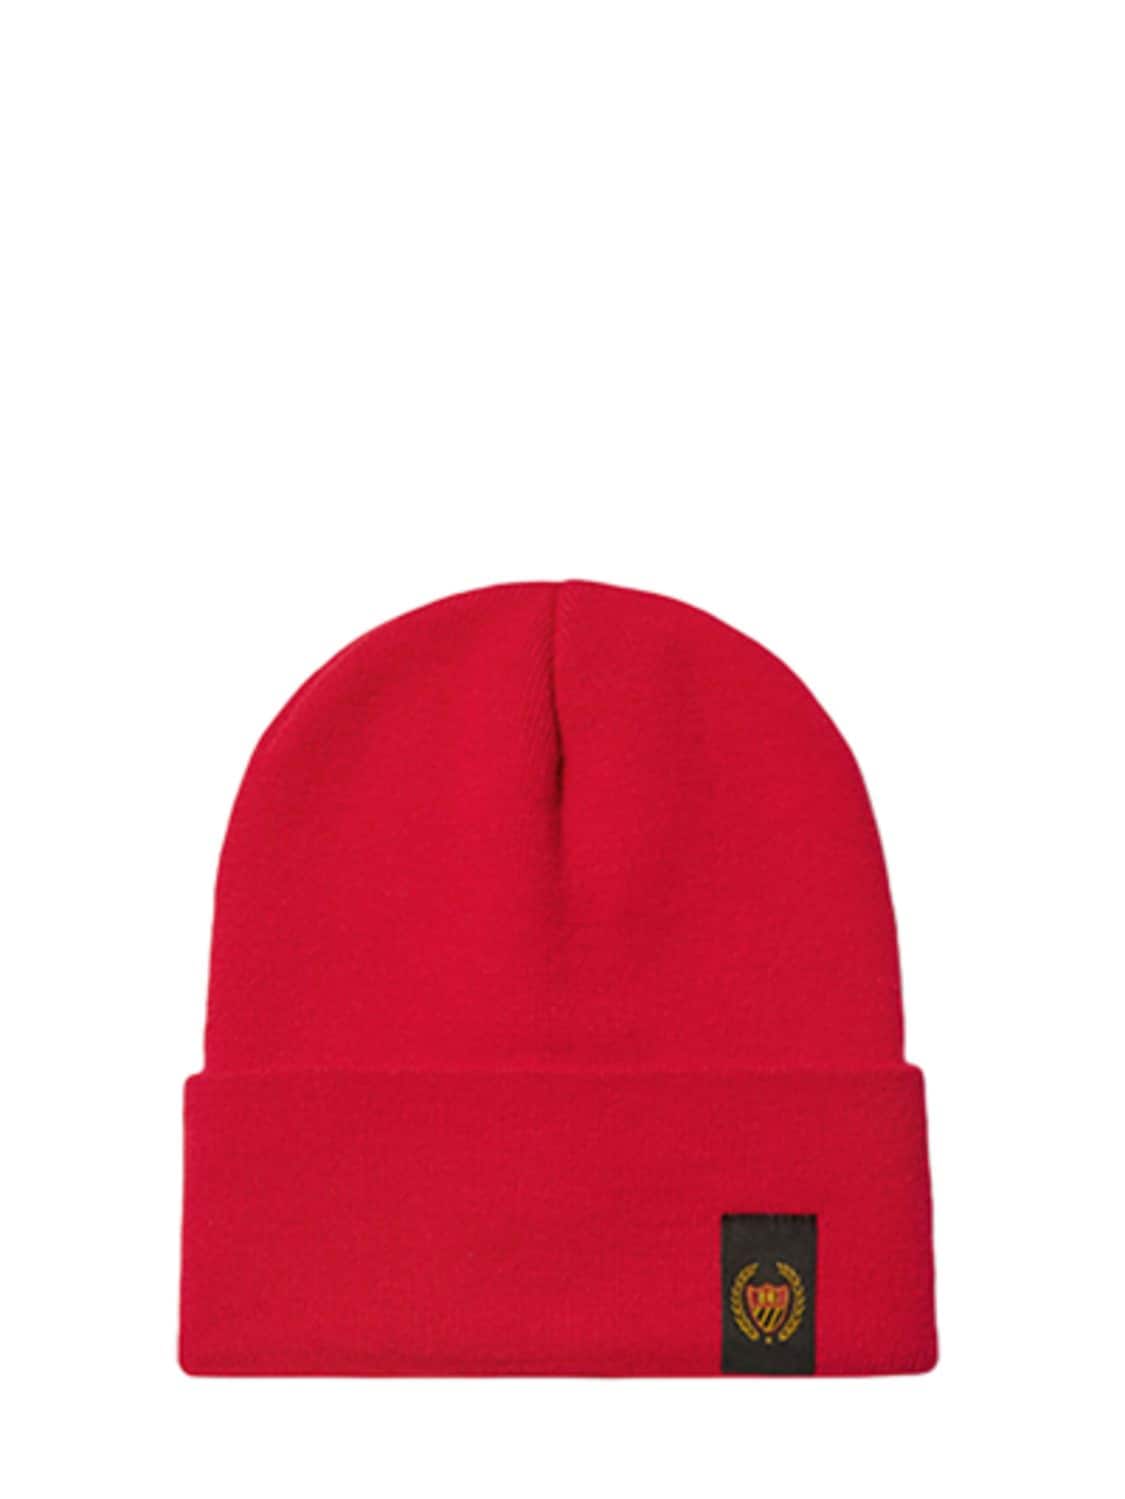 Bel-air Athletics Red Knitted Bonnet With Logo